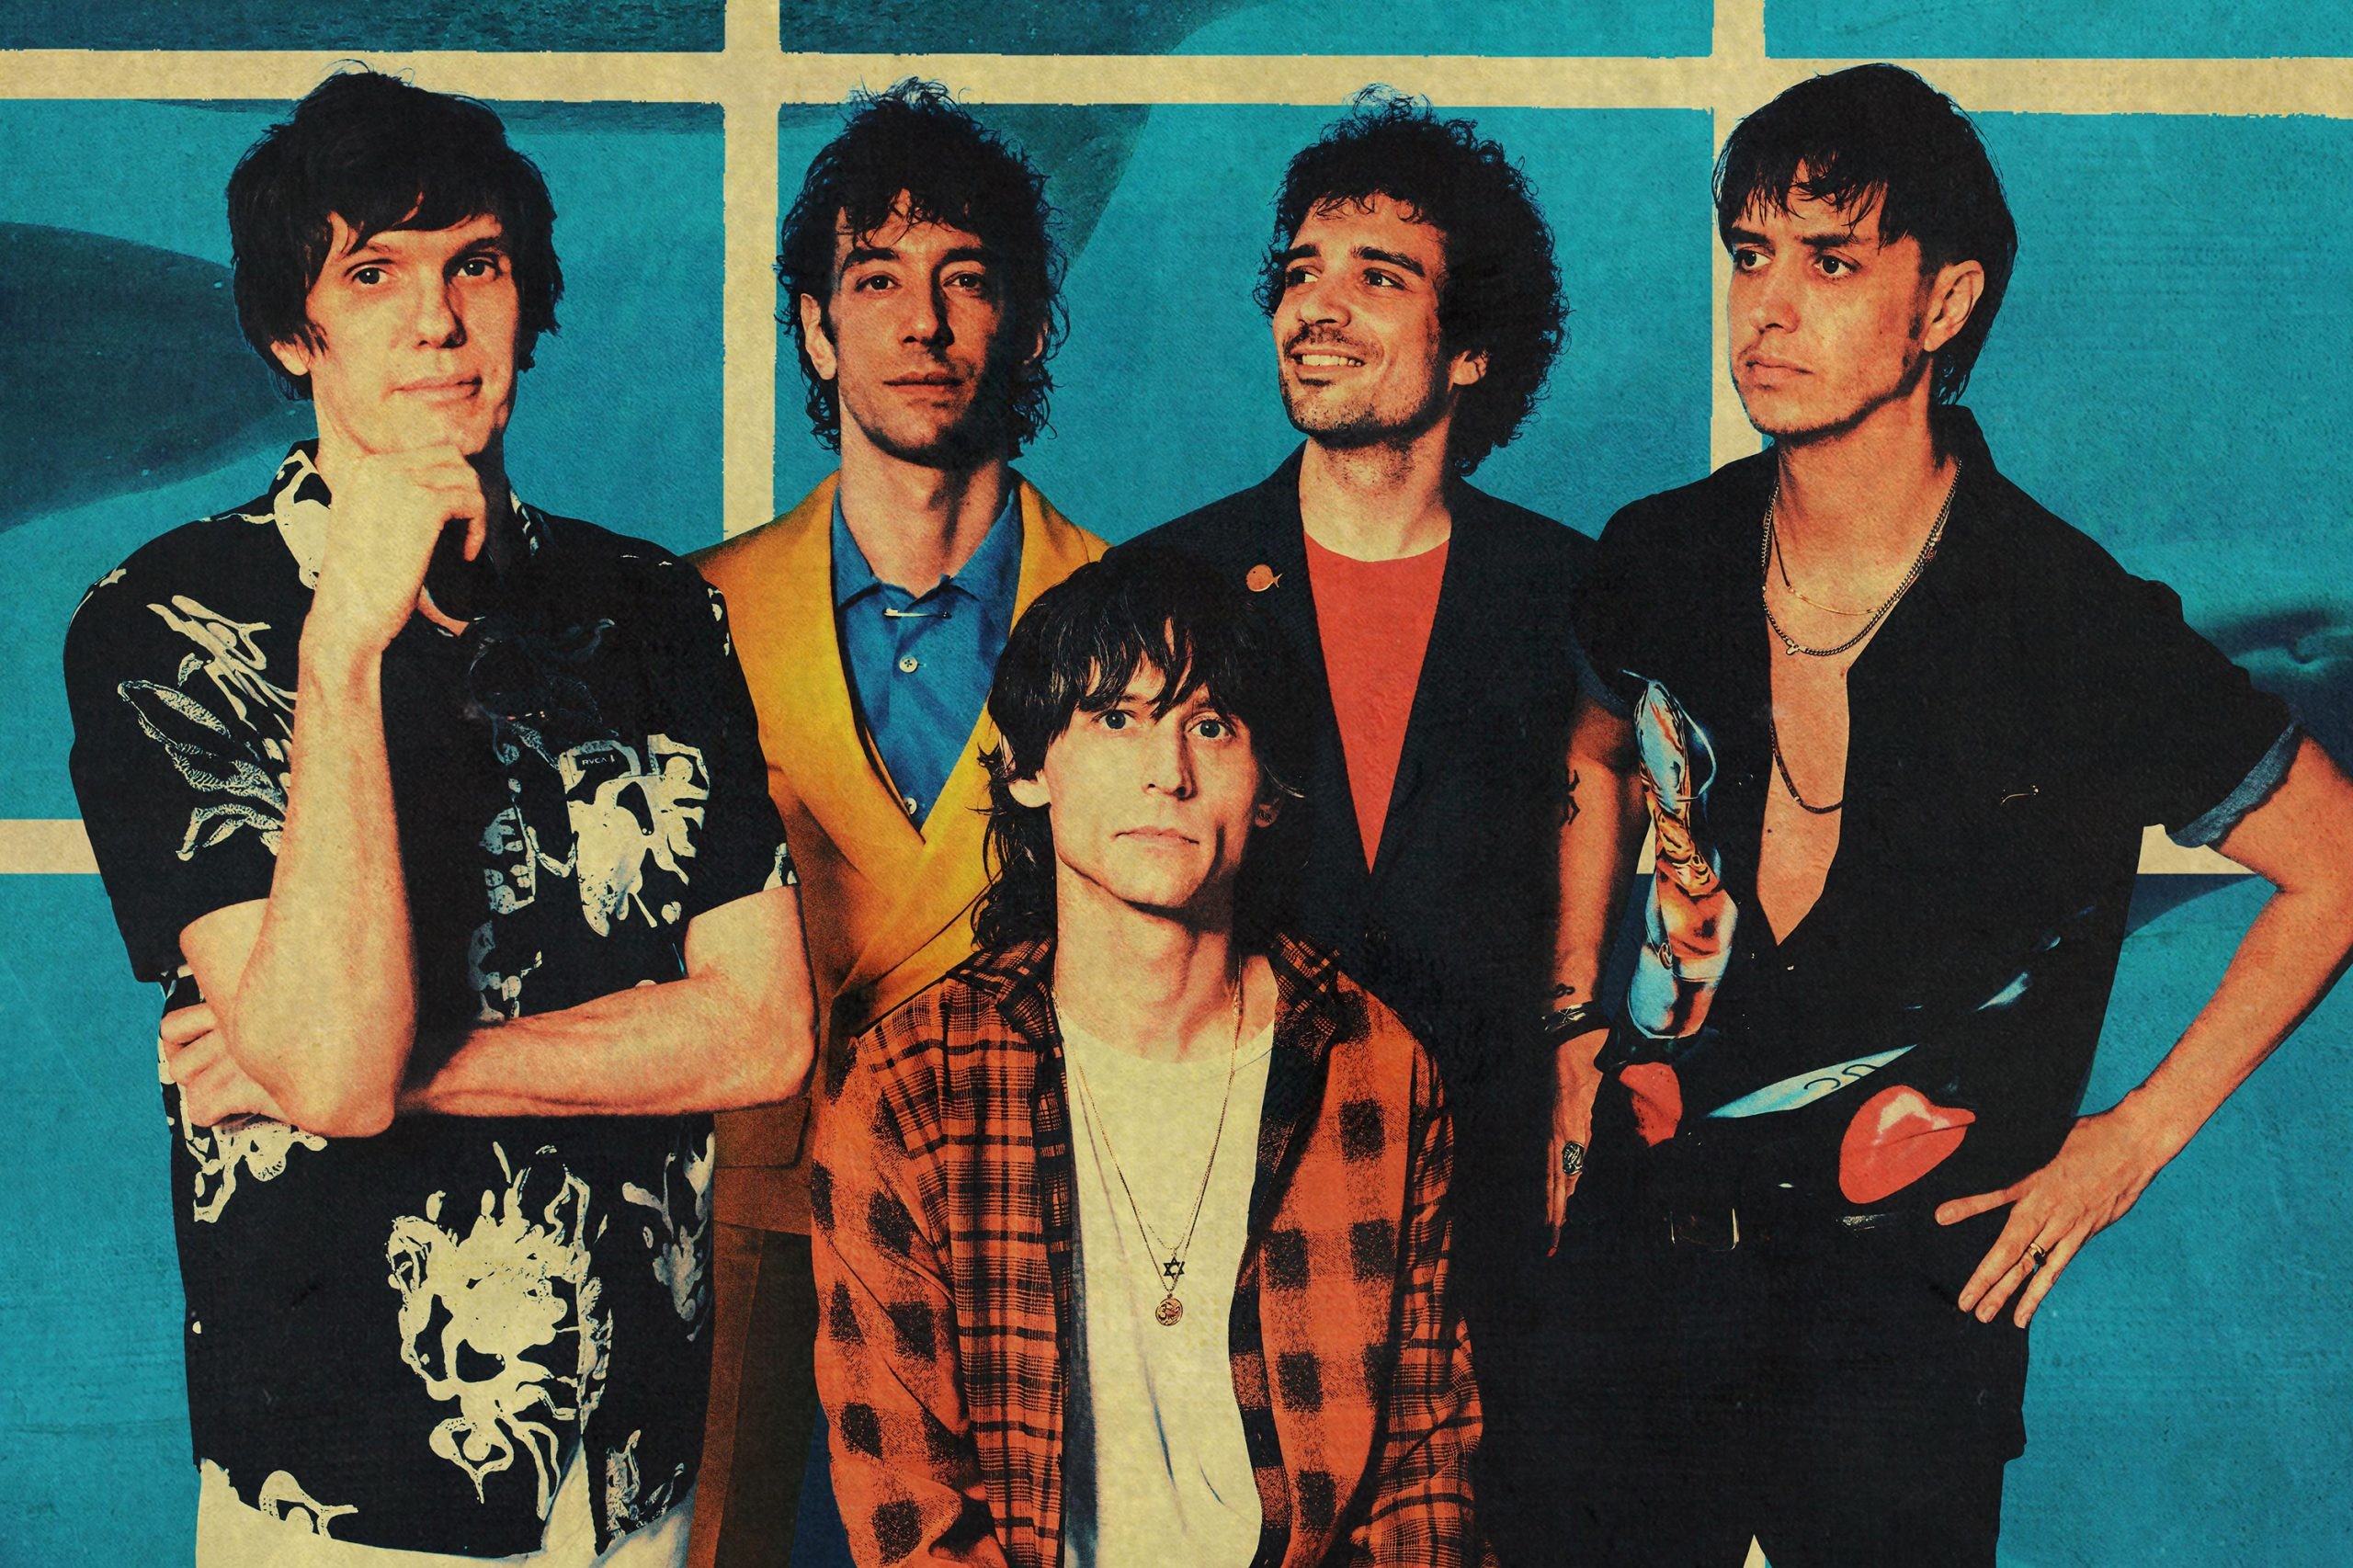 The Strokes have cancelled their first Primavera Sound performance due to a Covid-19 case (courtesy of RCA Records)